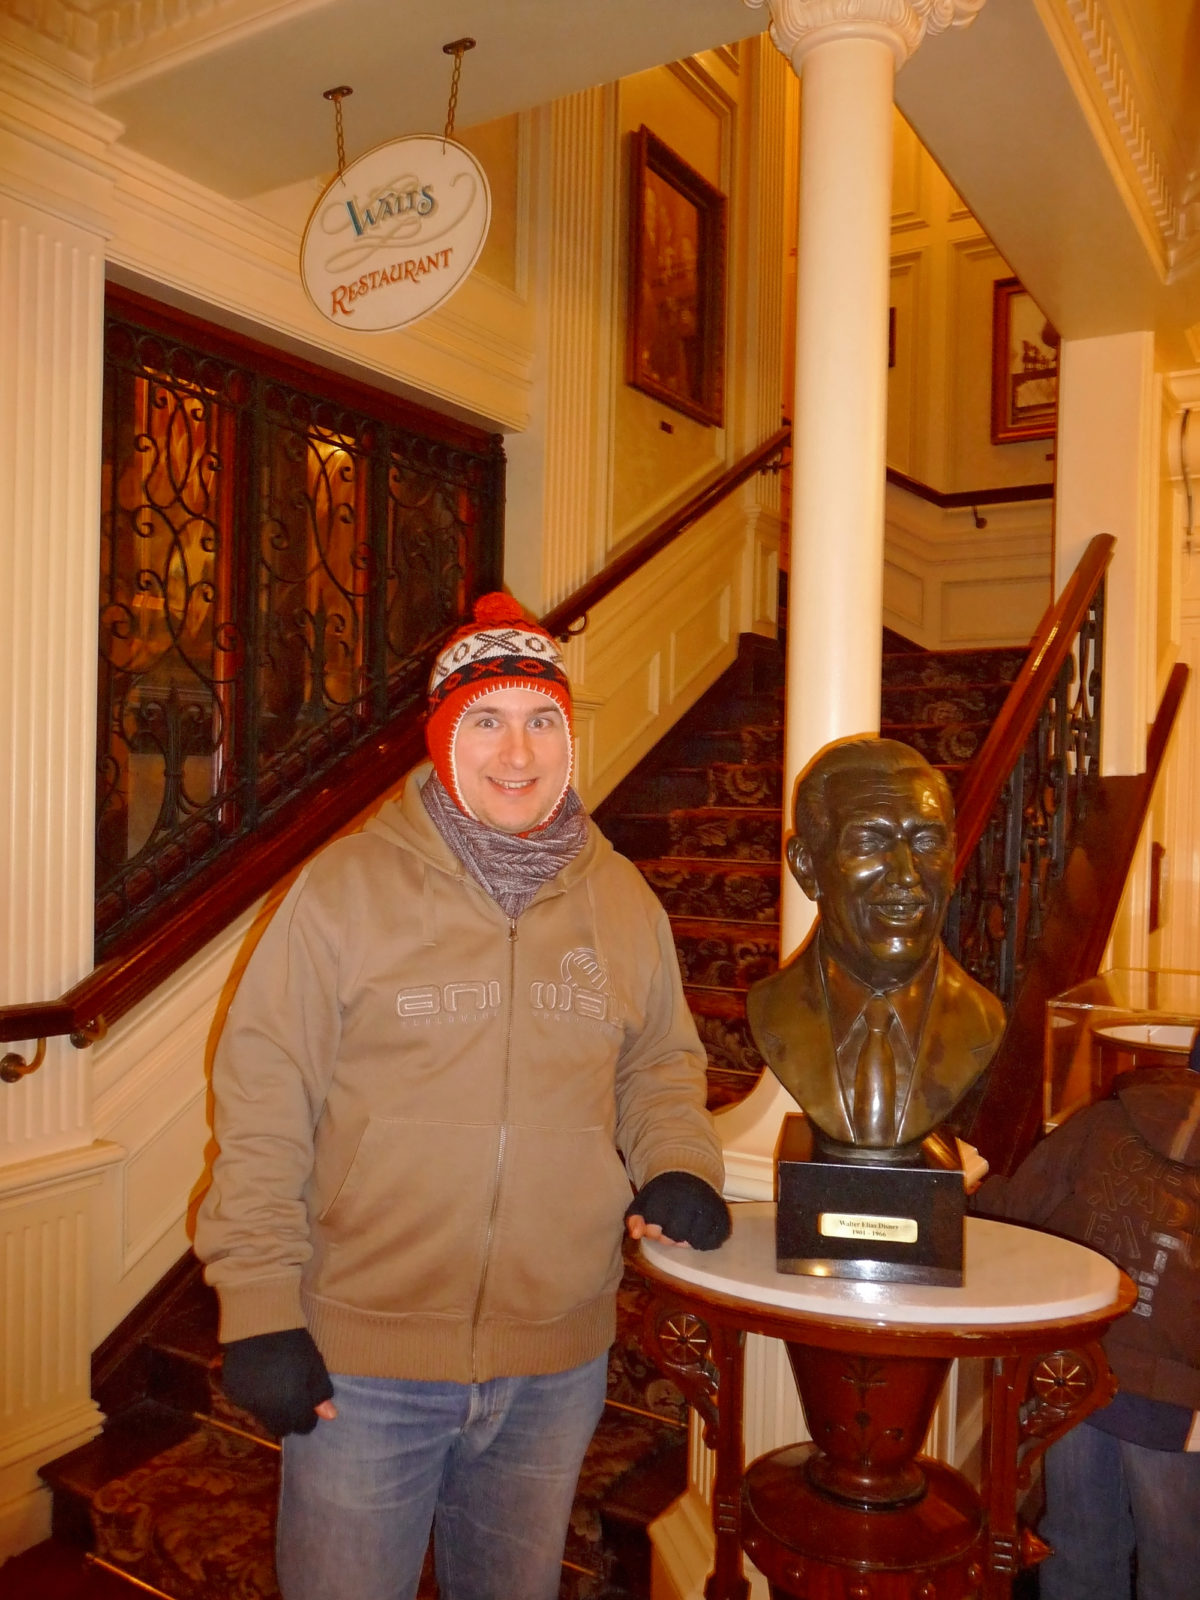 Image shows the bust of walt's head inside Walt's Restaurant in disneyland paris. A man is stood next to it, and he is dressed in warm winter clothes and a hat.